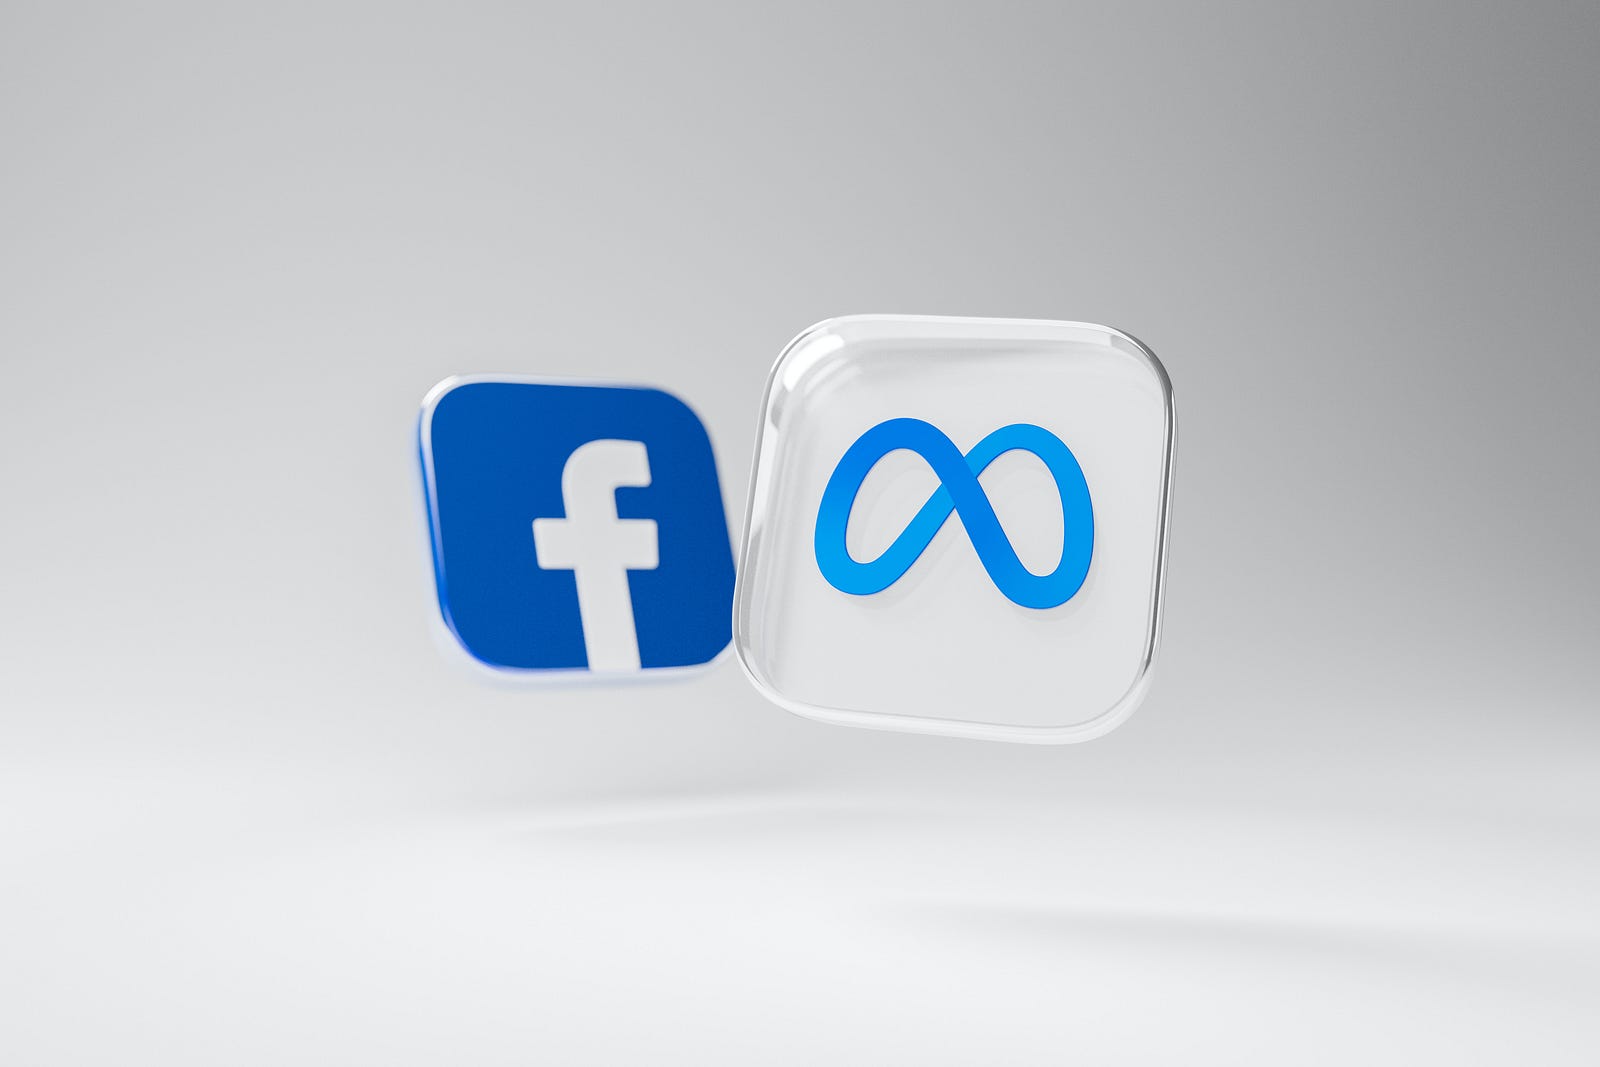 Two plastic, rectangular buttons show the Facebook and Meta logos, respectively. In our hyper-connected world, constant emails, messages, and social media updates can contribute to stress.